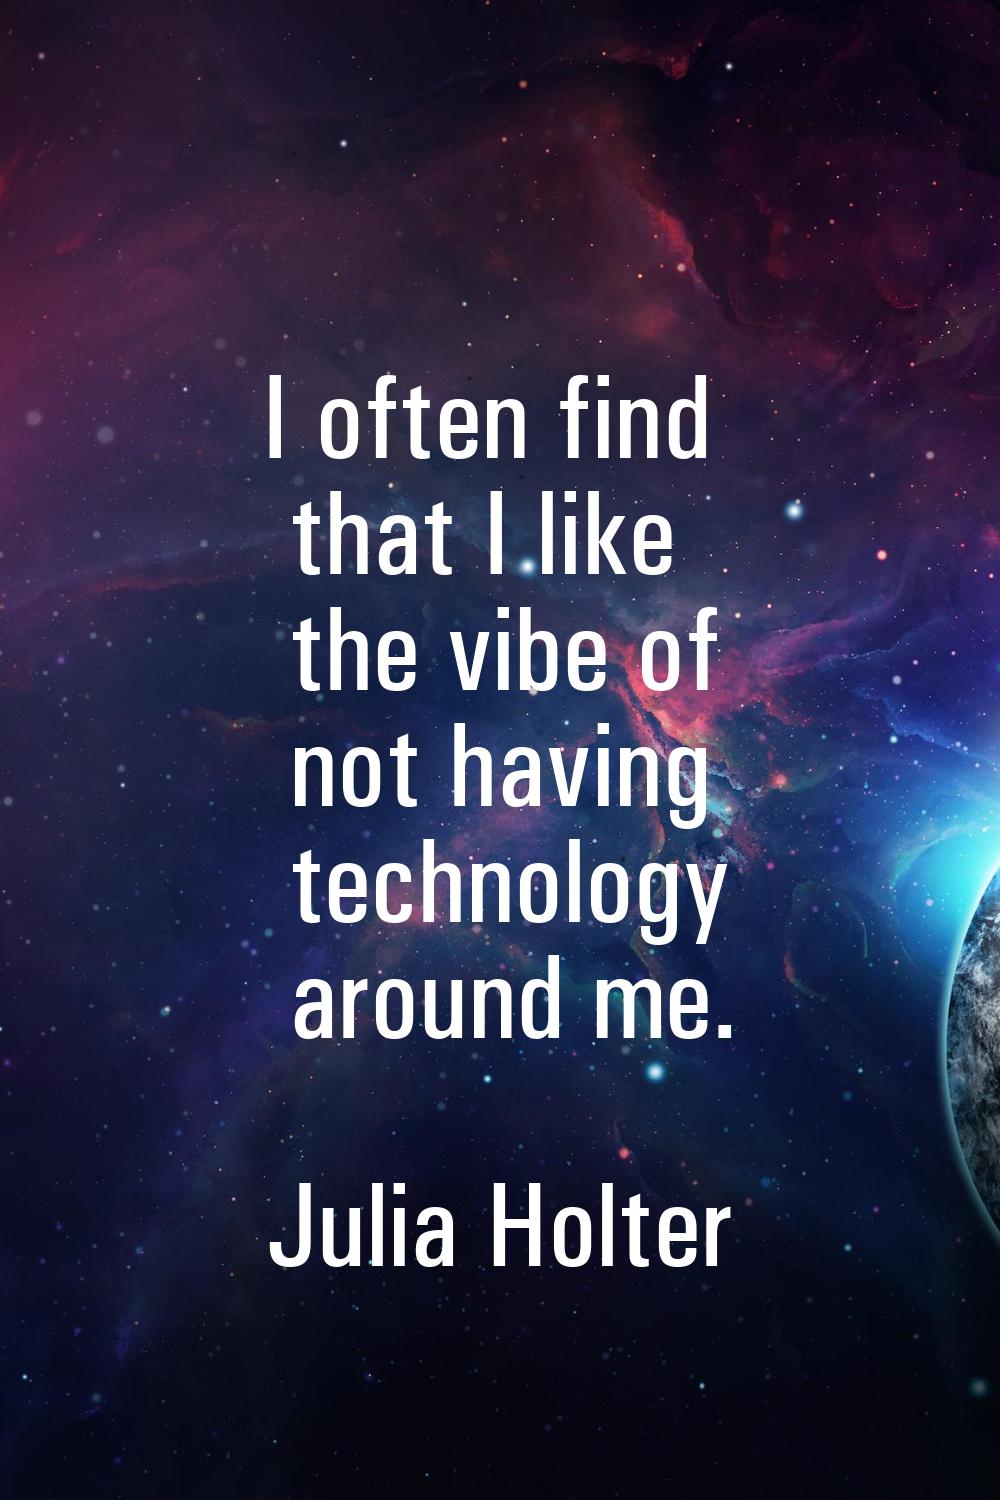 I often find that I like the vibe of not having technology around me.